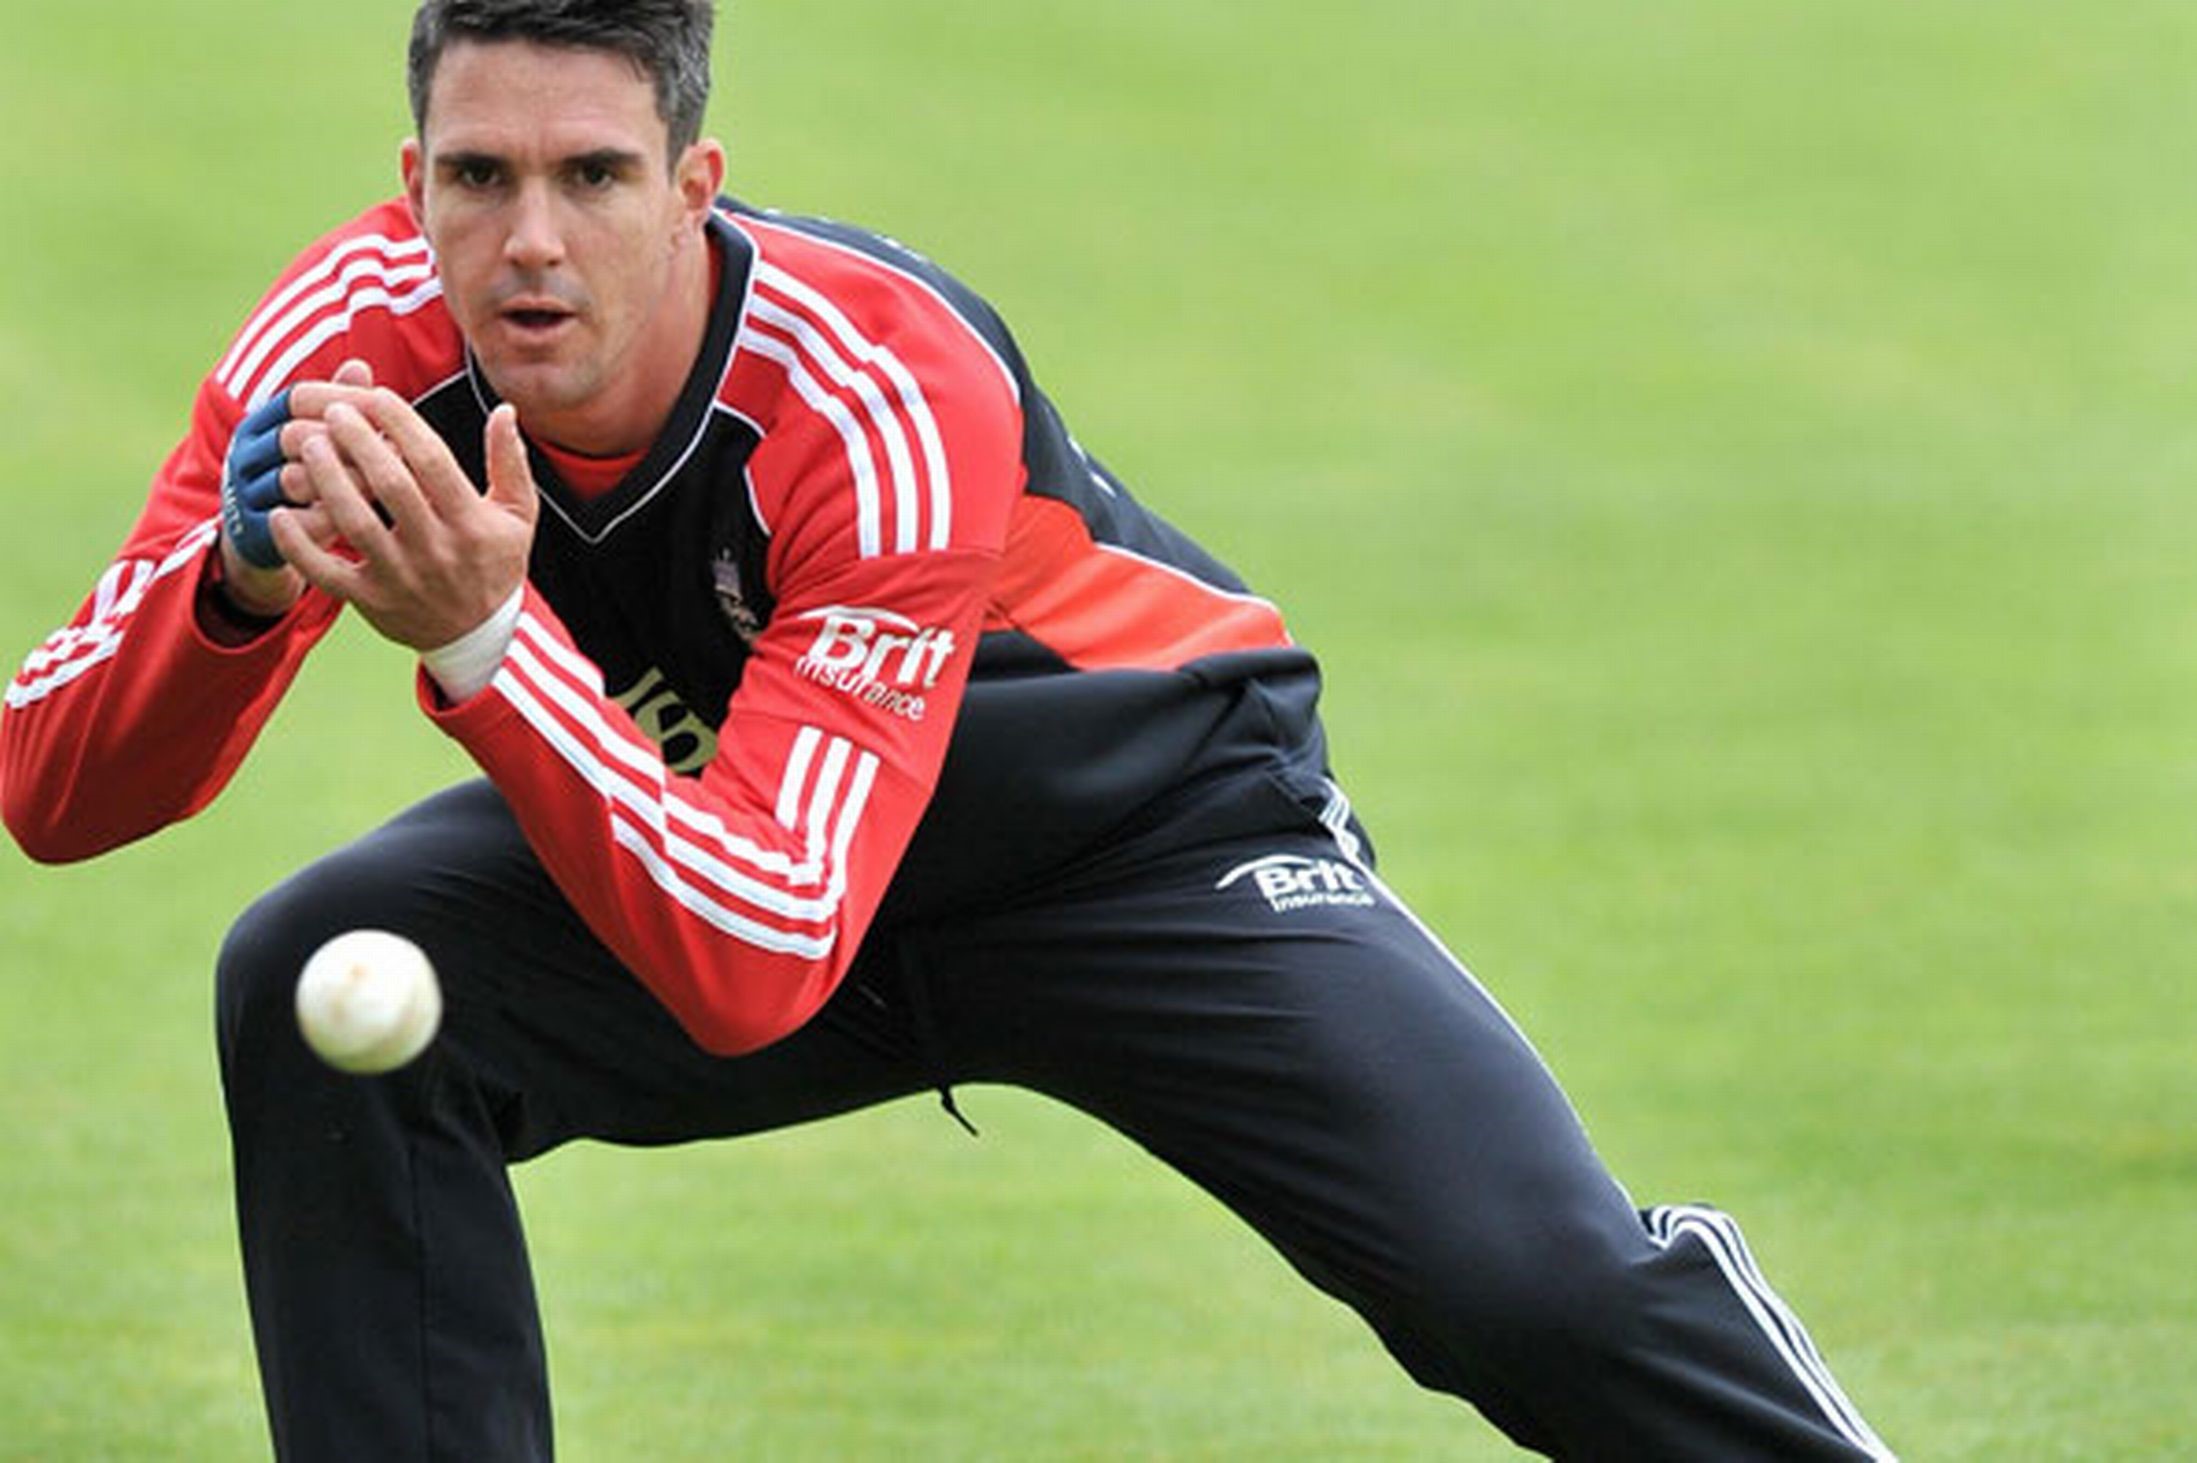 England Cricketer Kevin Pietersen Takes Catch During - Catch Practice In Cricket - HD Wallpaper 